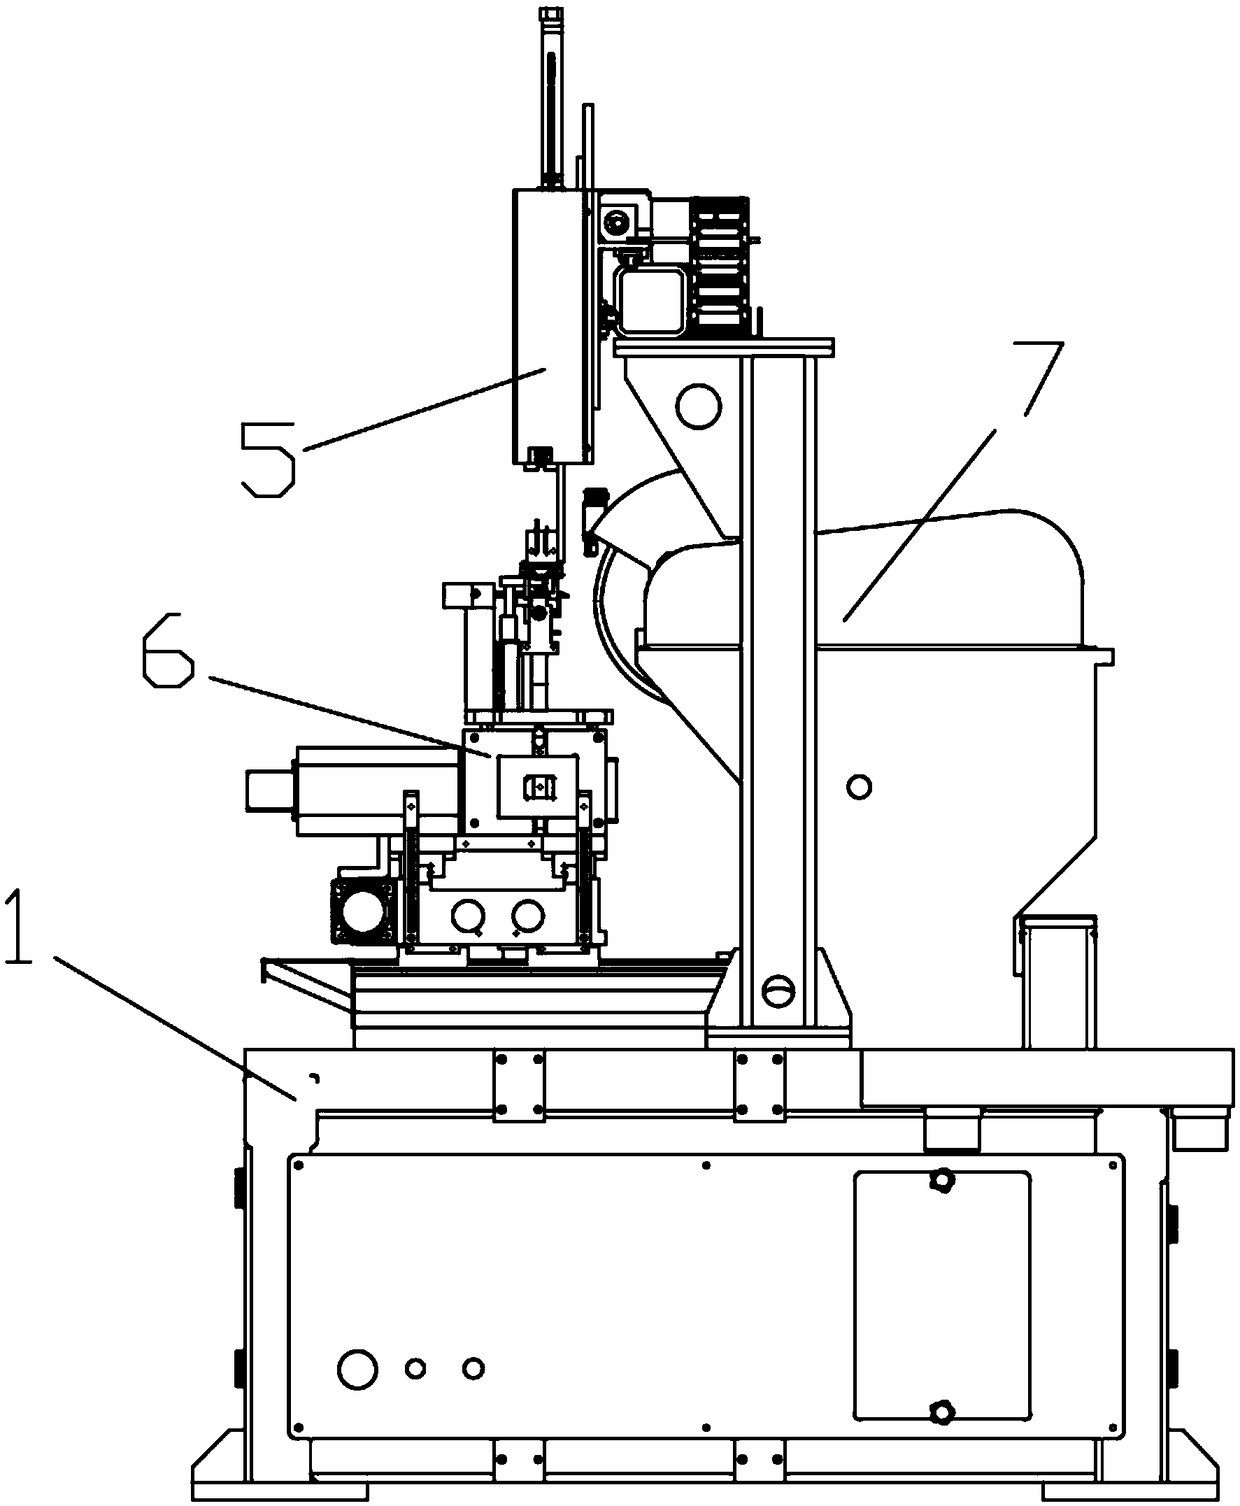 Numerical control grinding machine for caliper periphery